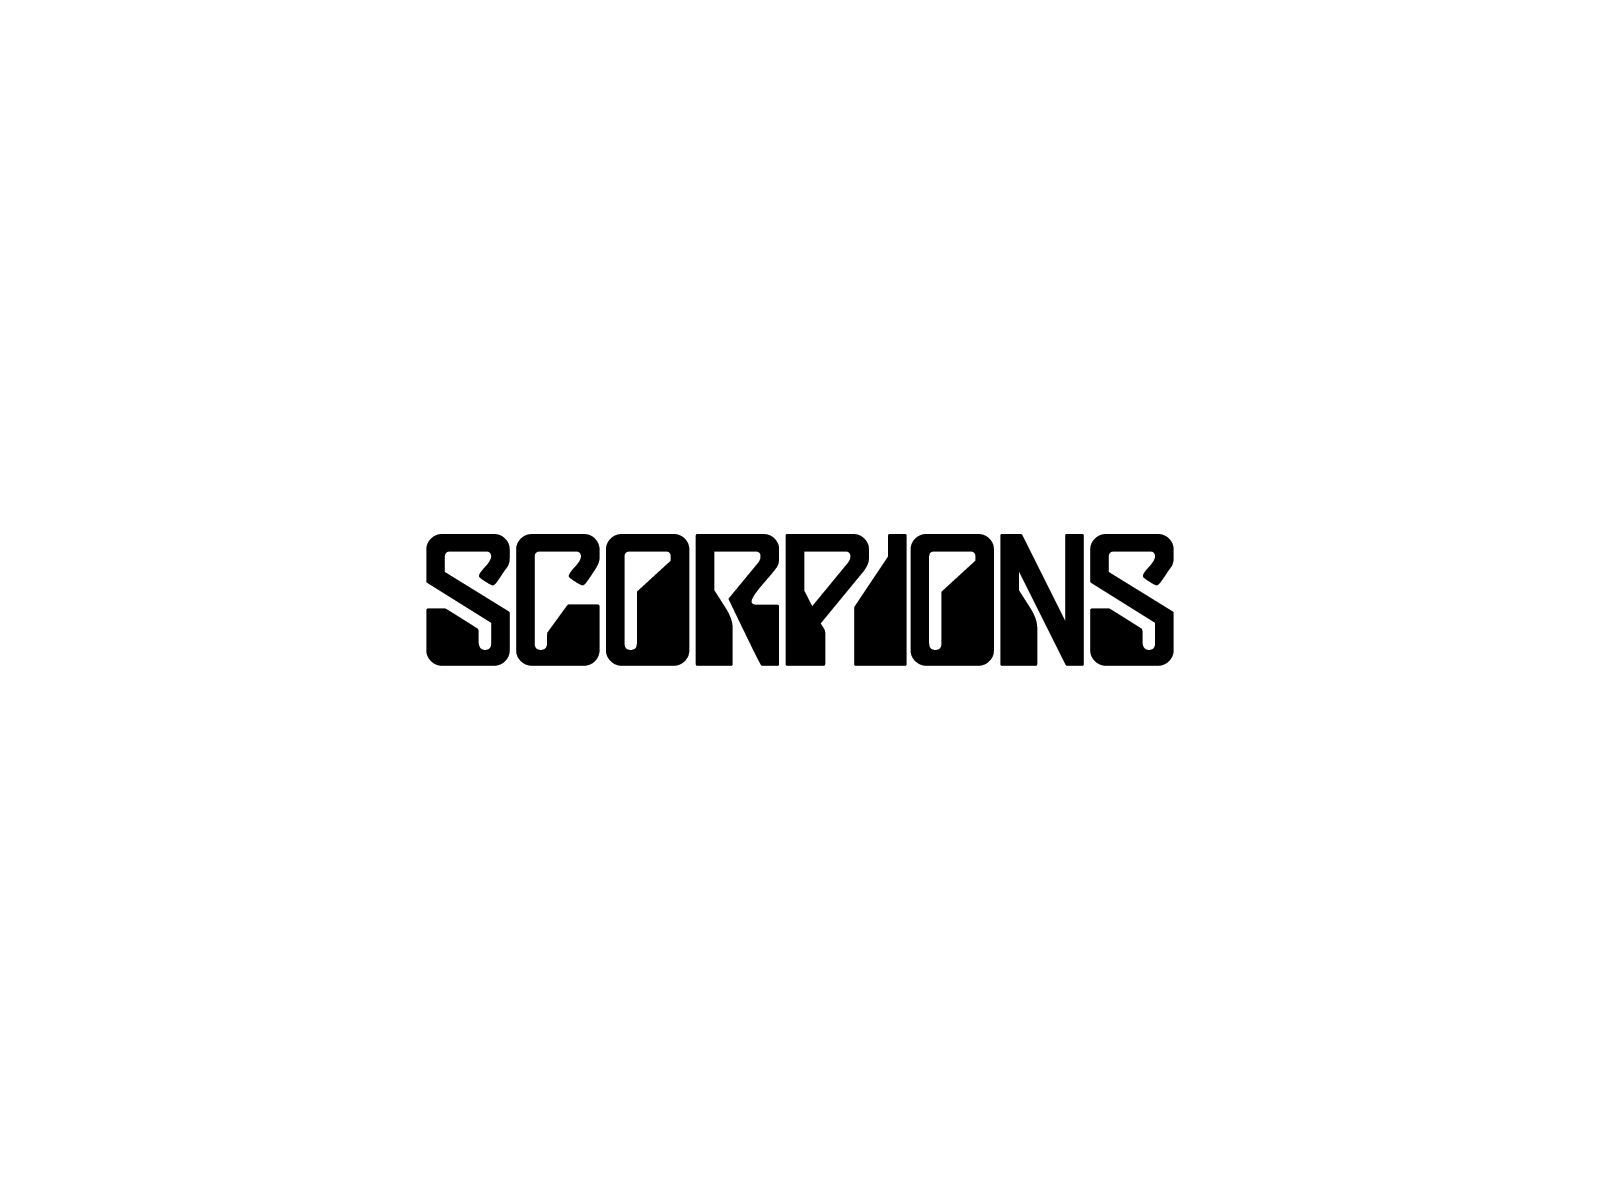  Scorpions HD Android Wallpapers